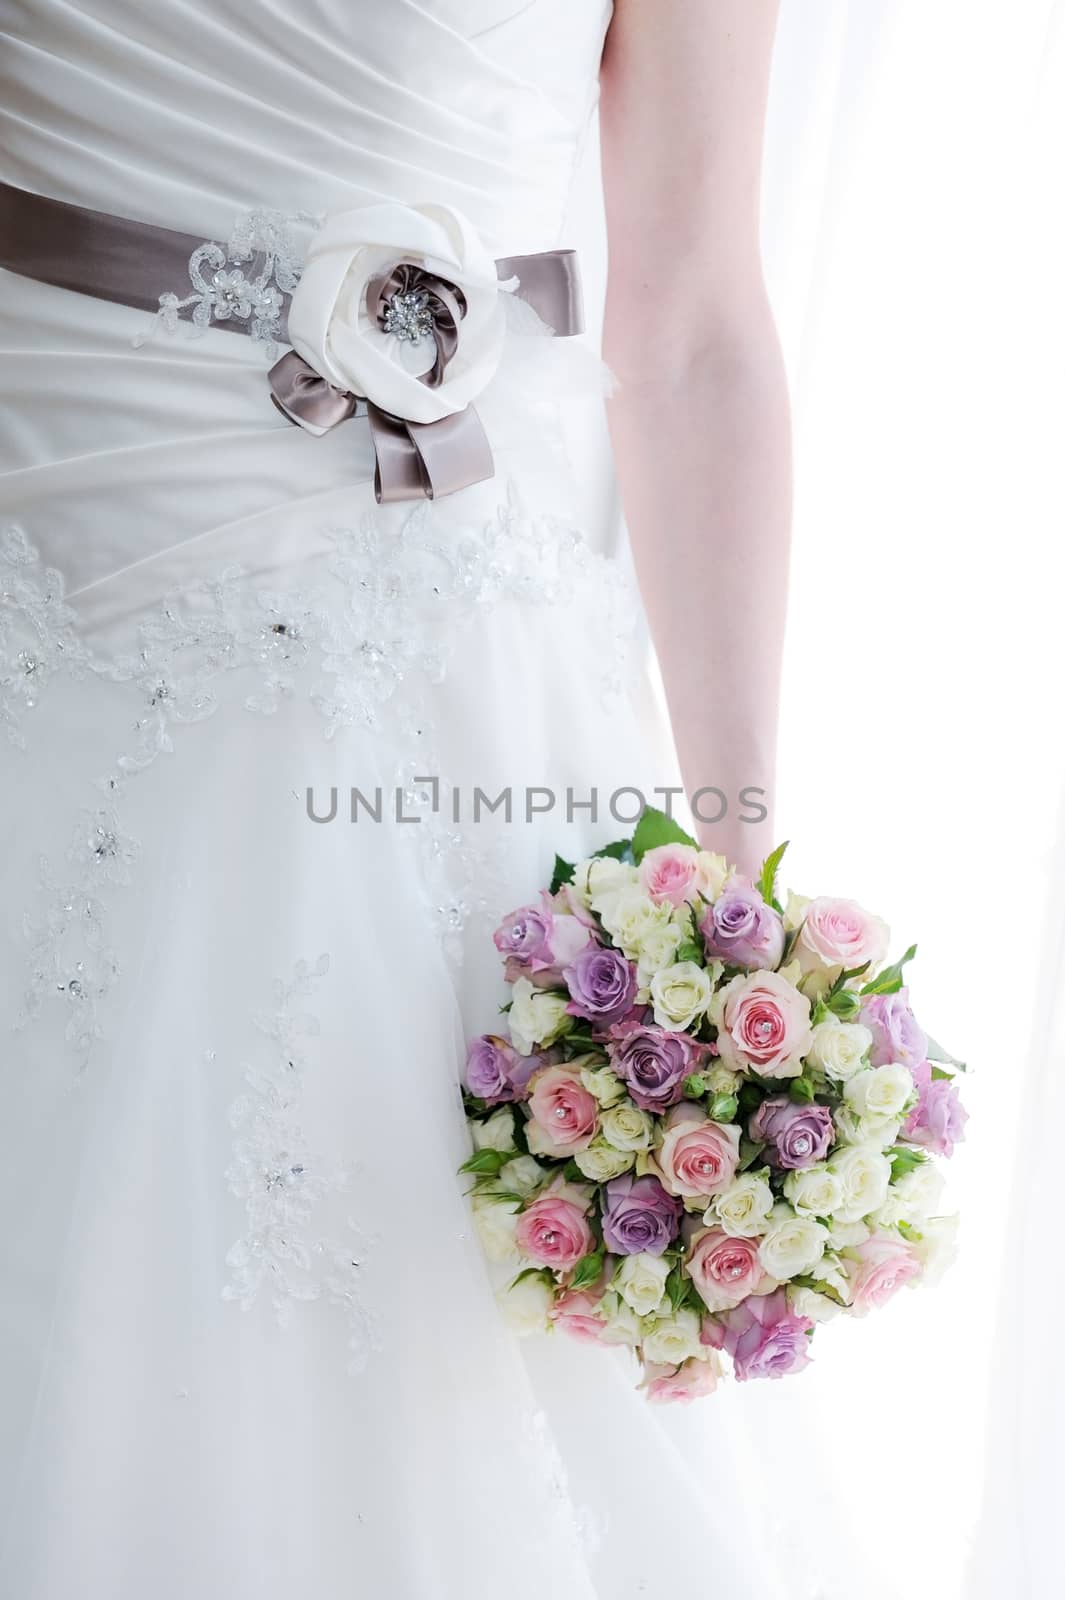 Brides flowers and dress closeup by kmwphotography